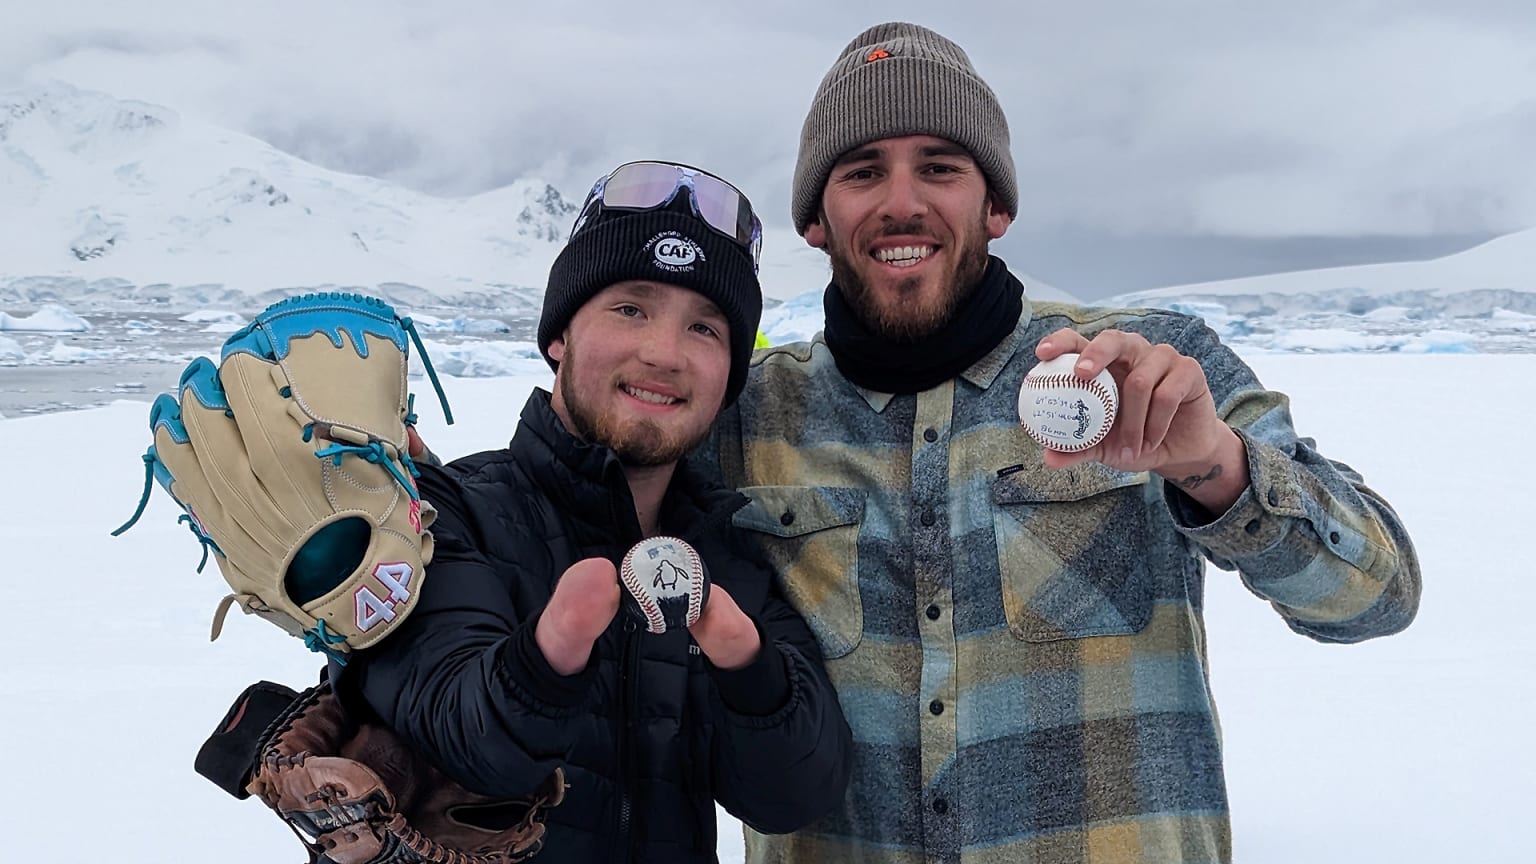 Joe Musgrove and another man show off baseballs in a snowy landscape in Antarctica